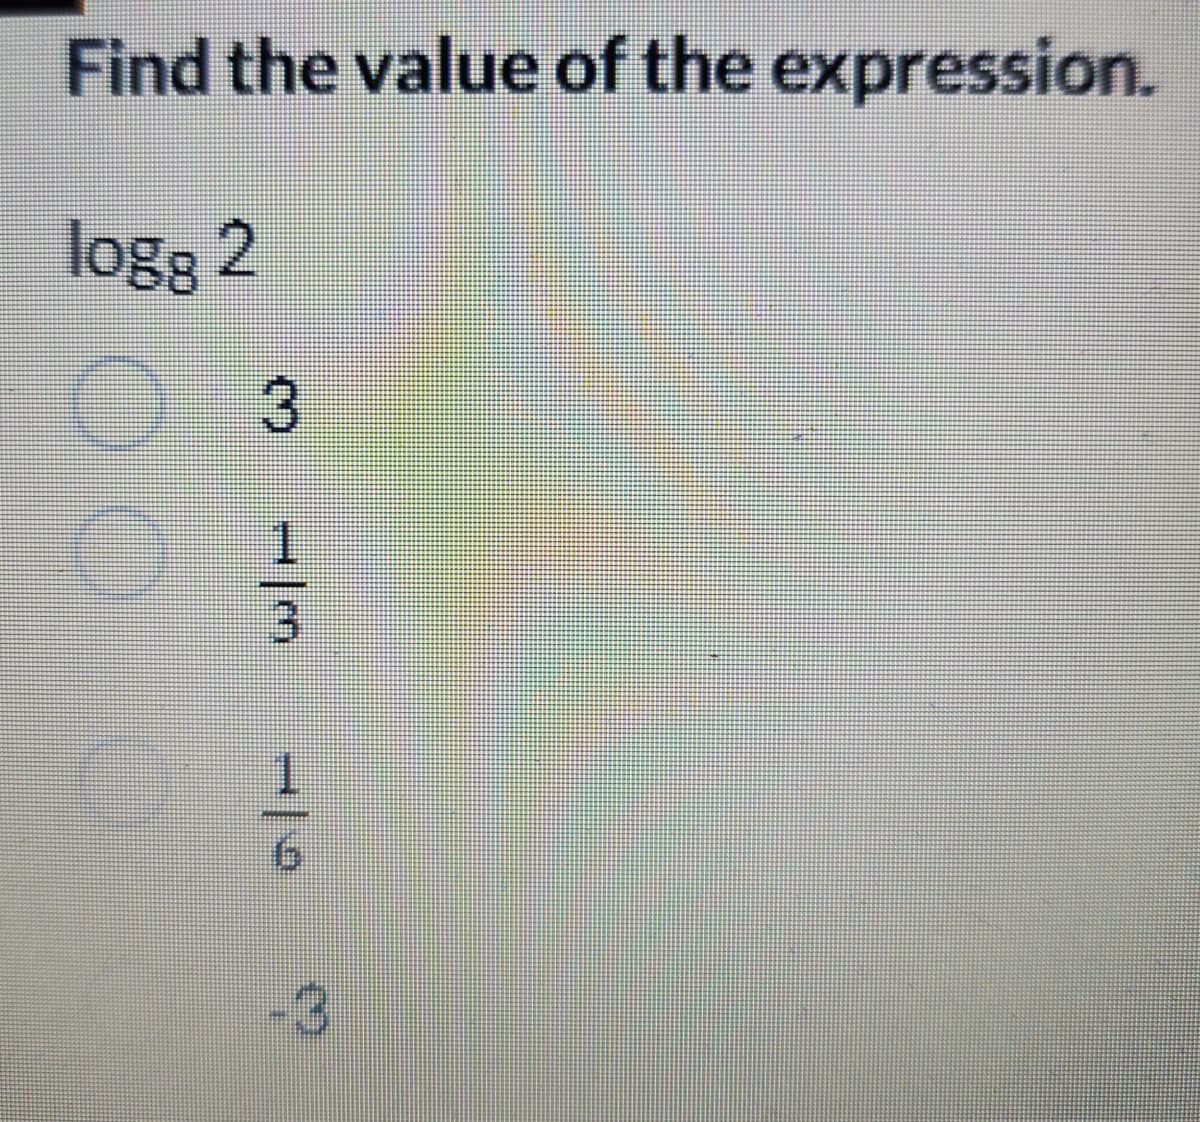 Find the value of the expression.
logg 2
3
|-|M|
-|9
-3